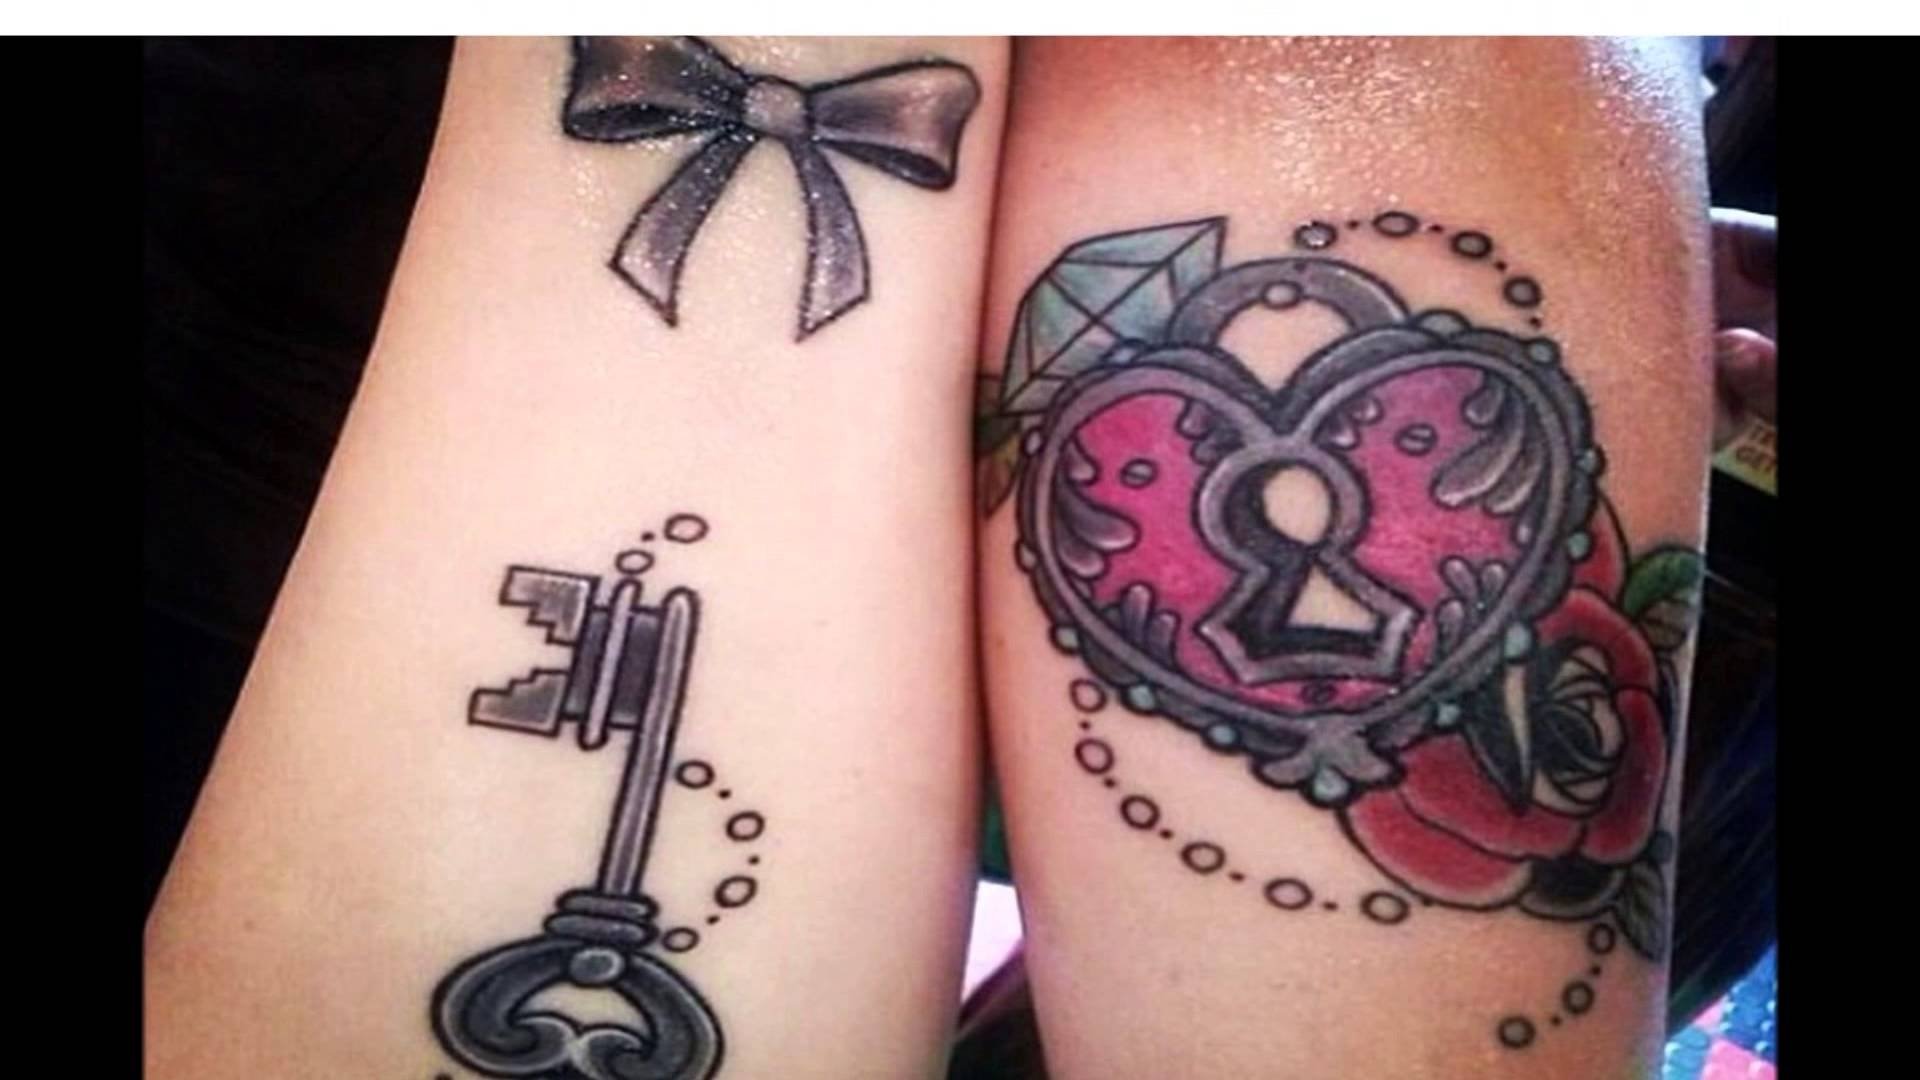 10 Spectacular His And Her Tattoo Ideas his and her tattoo ideas youtube 2022